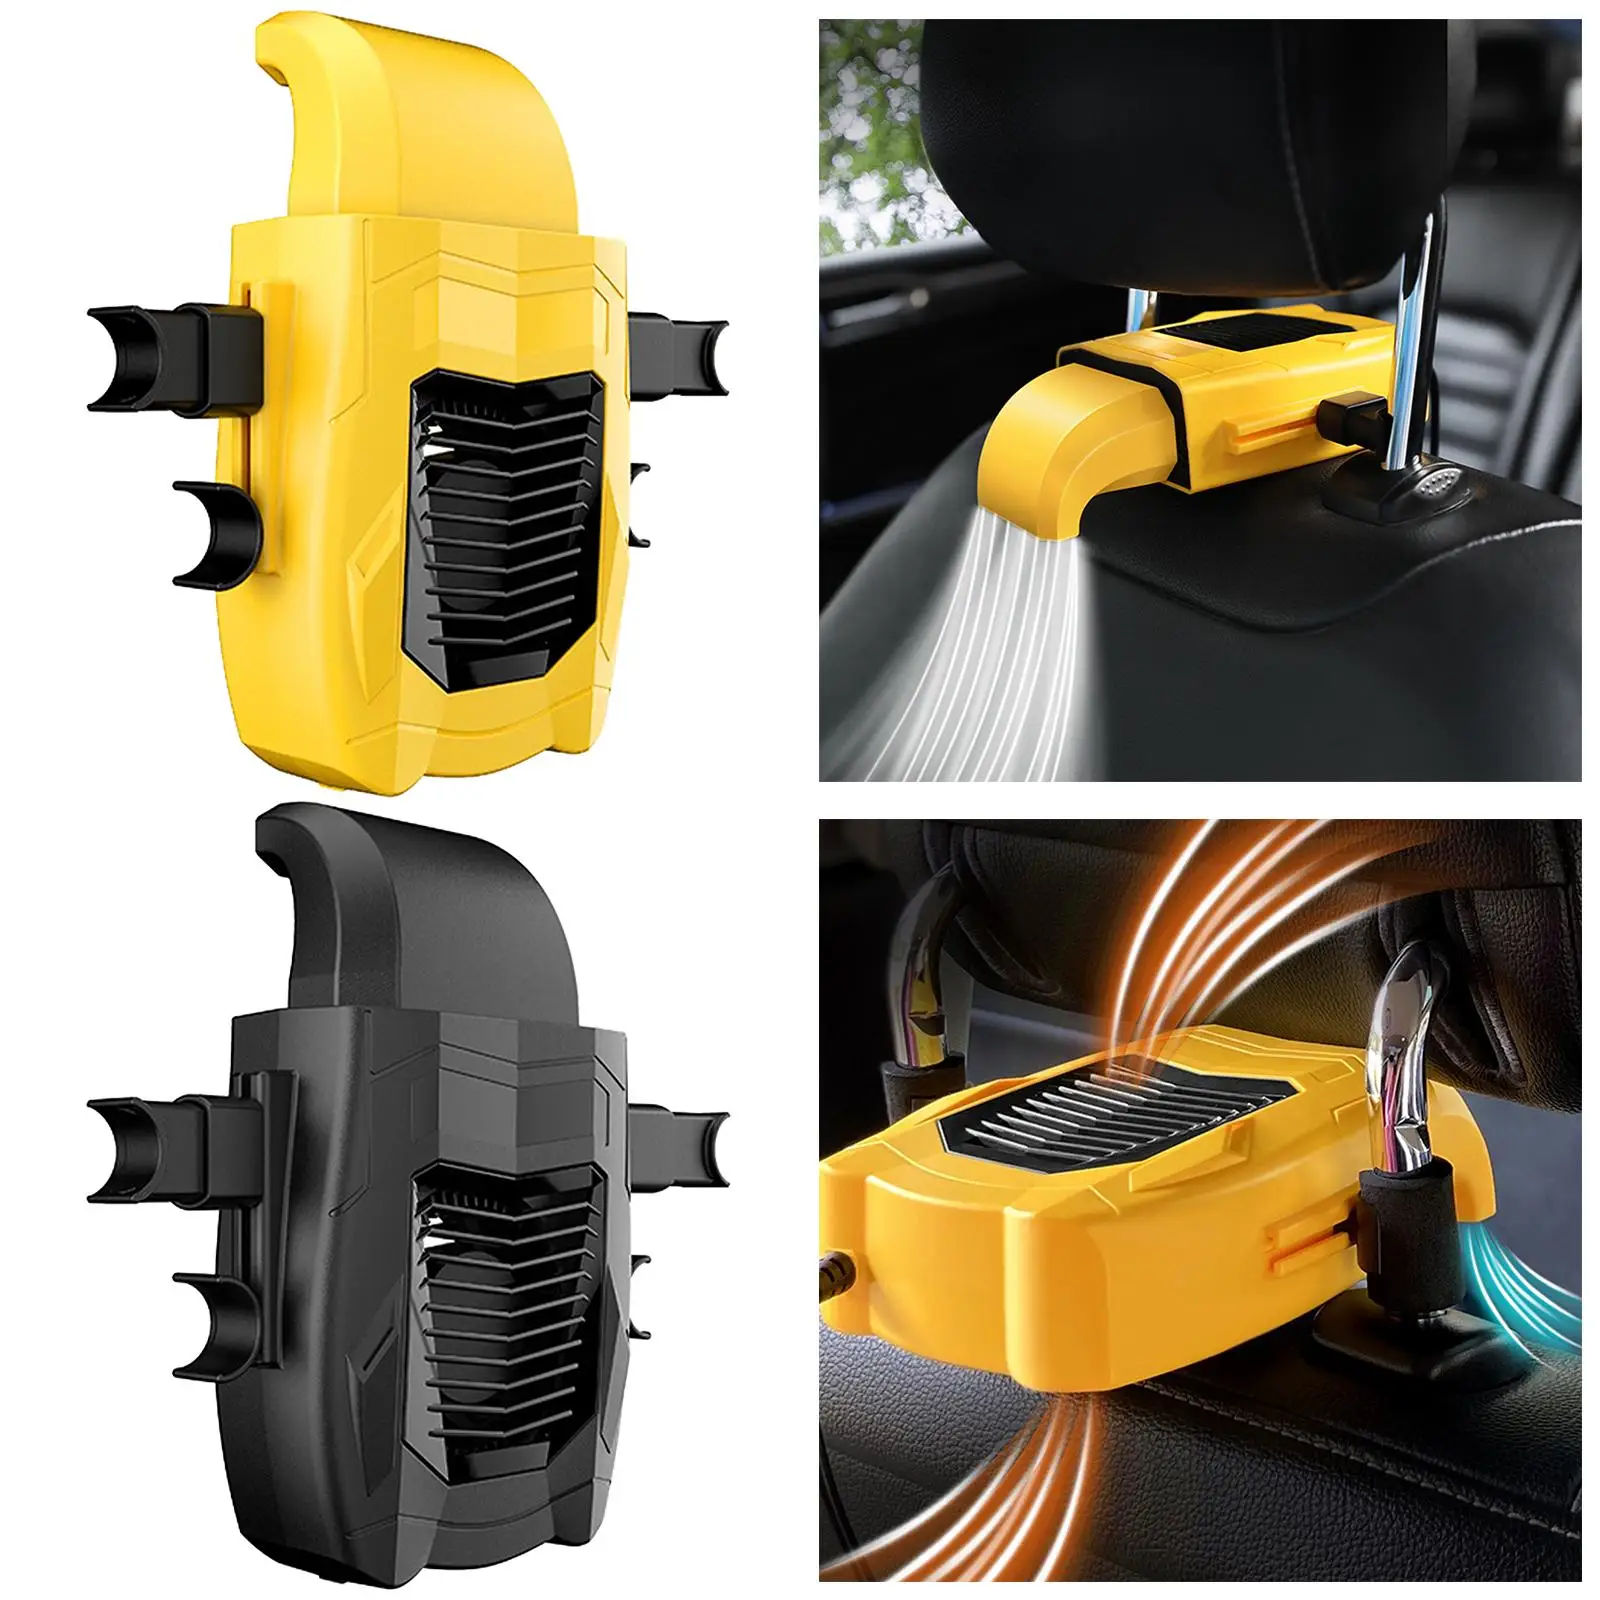  Headrest Fan USB 12V Comfortable , Seat Bar Spacing 110G168mm , Made of Sturdy  Material